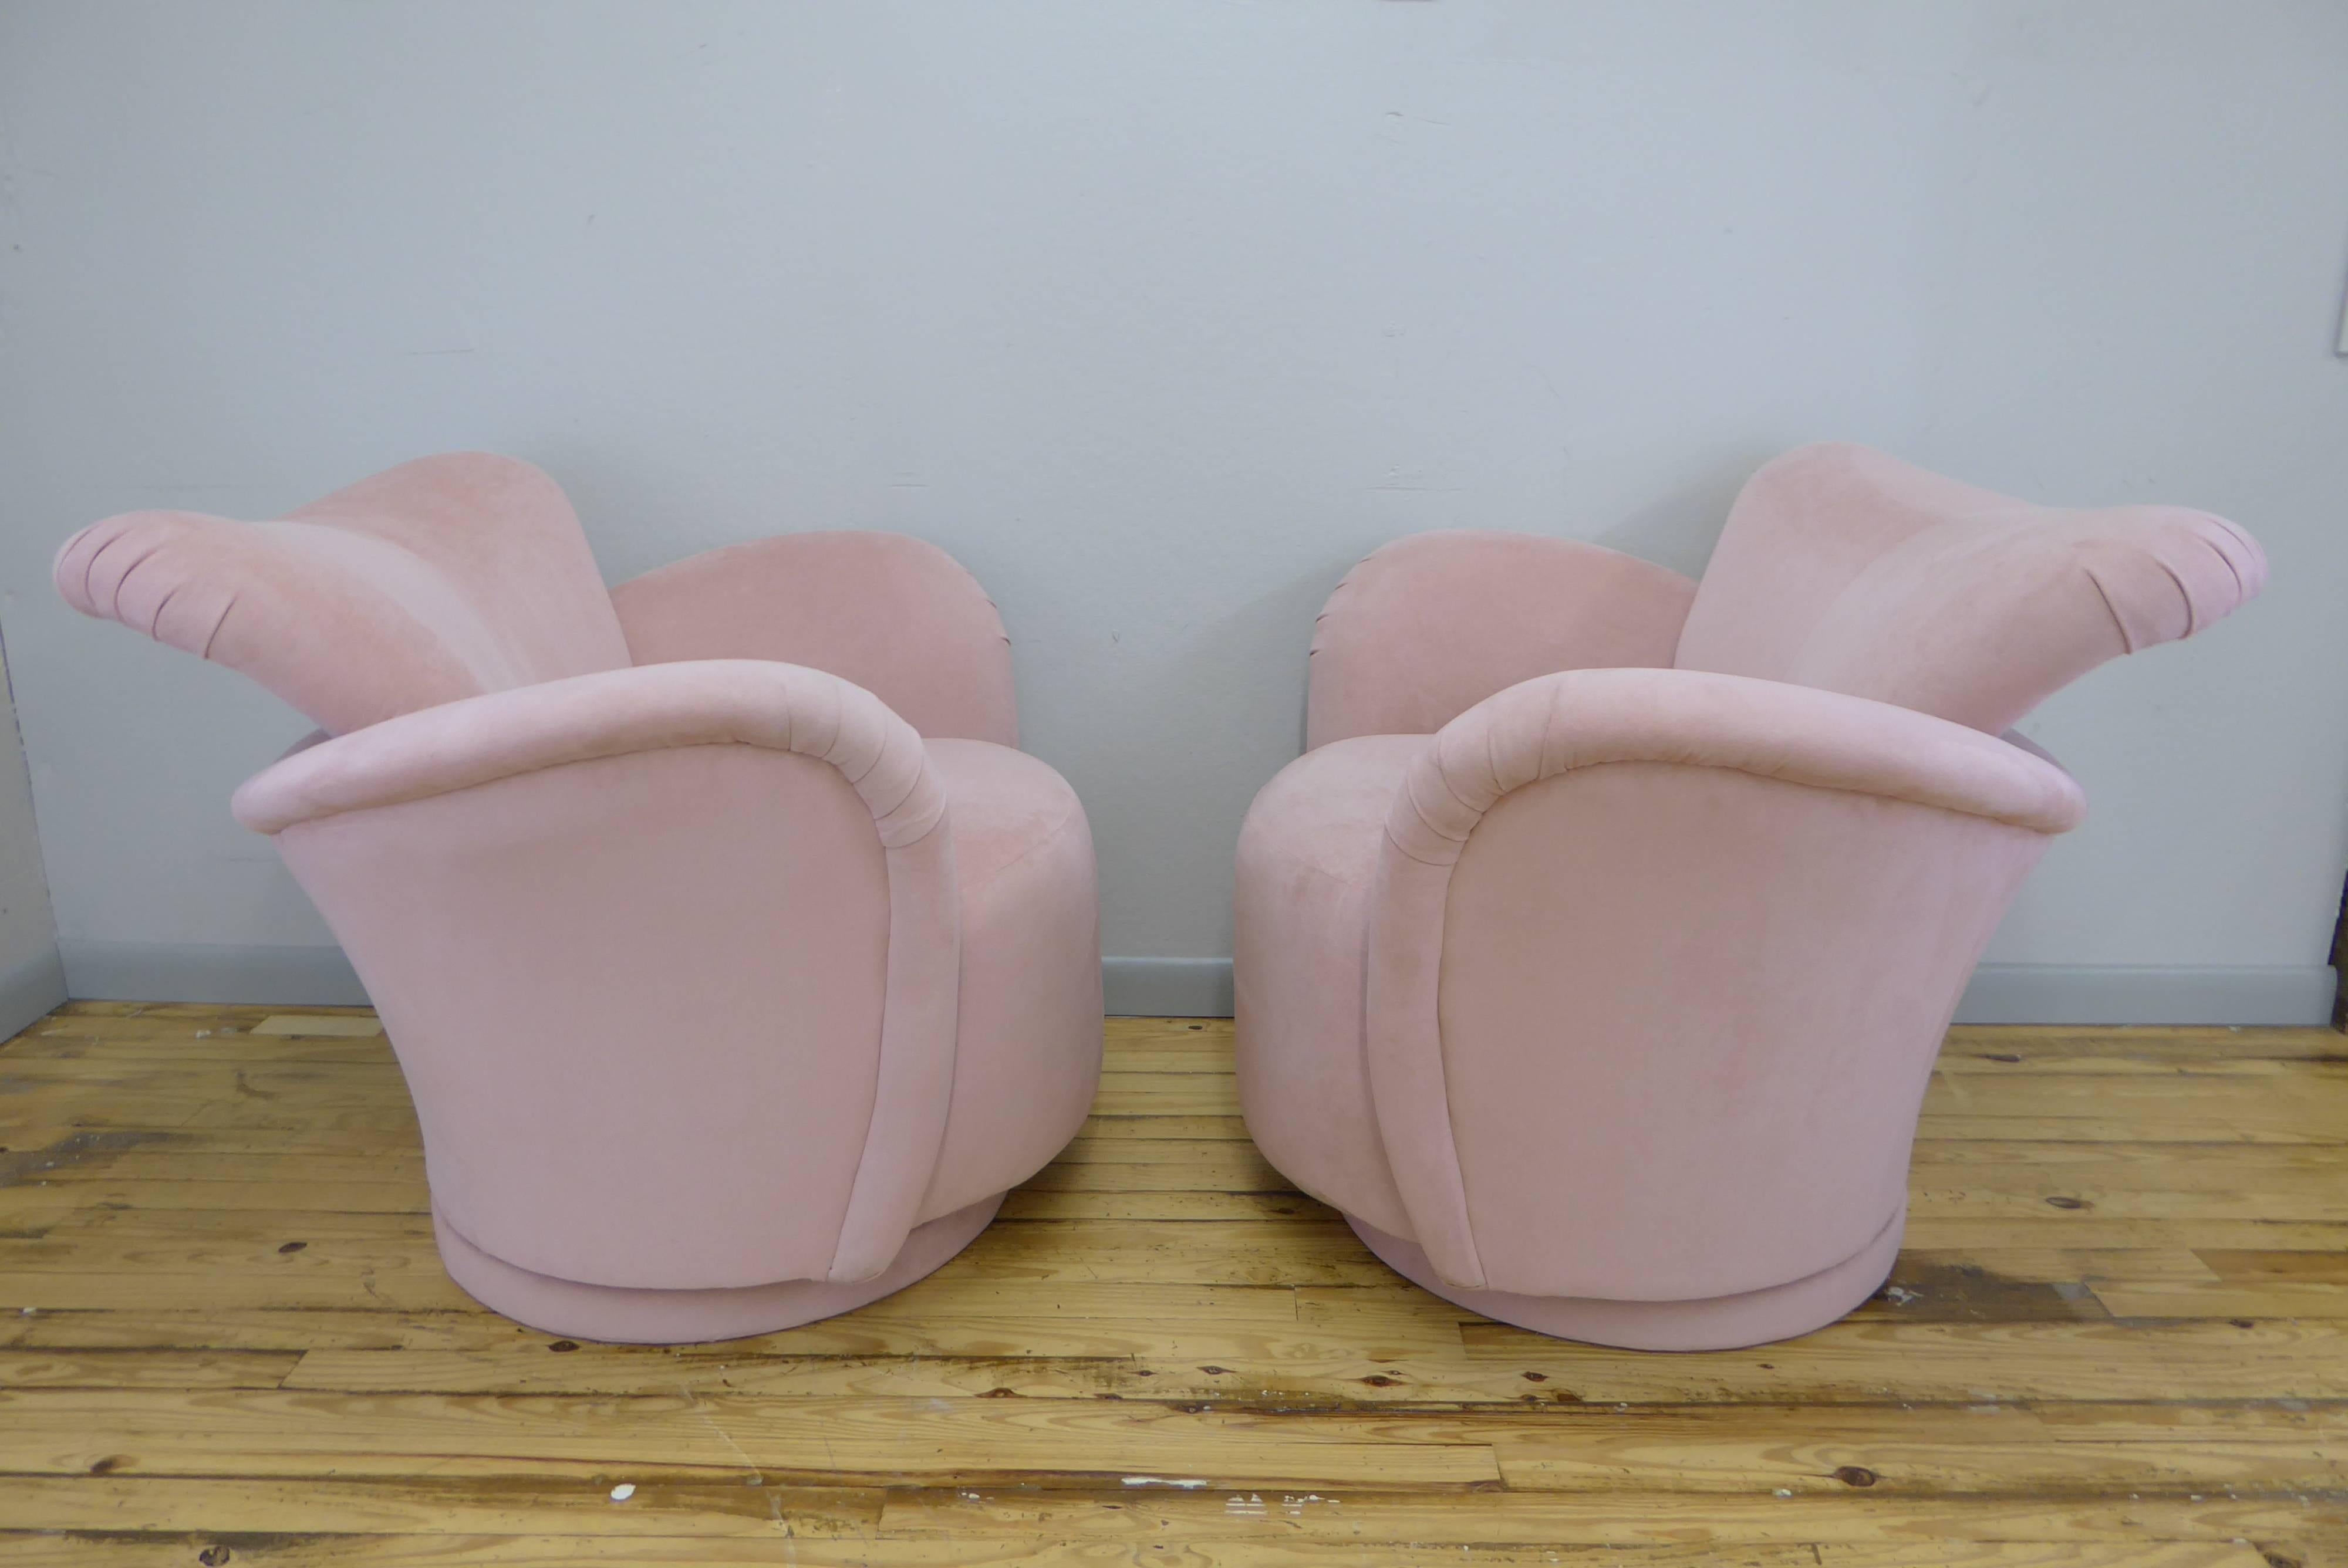 Fantastic pair of swivel chairs in the manner of Vladimir Kagan. Original blush ultrasuede upholstery. Chairs swivel, tilt and rock- incredibly comfortable pair of chairs in excellent condition. 